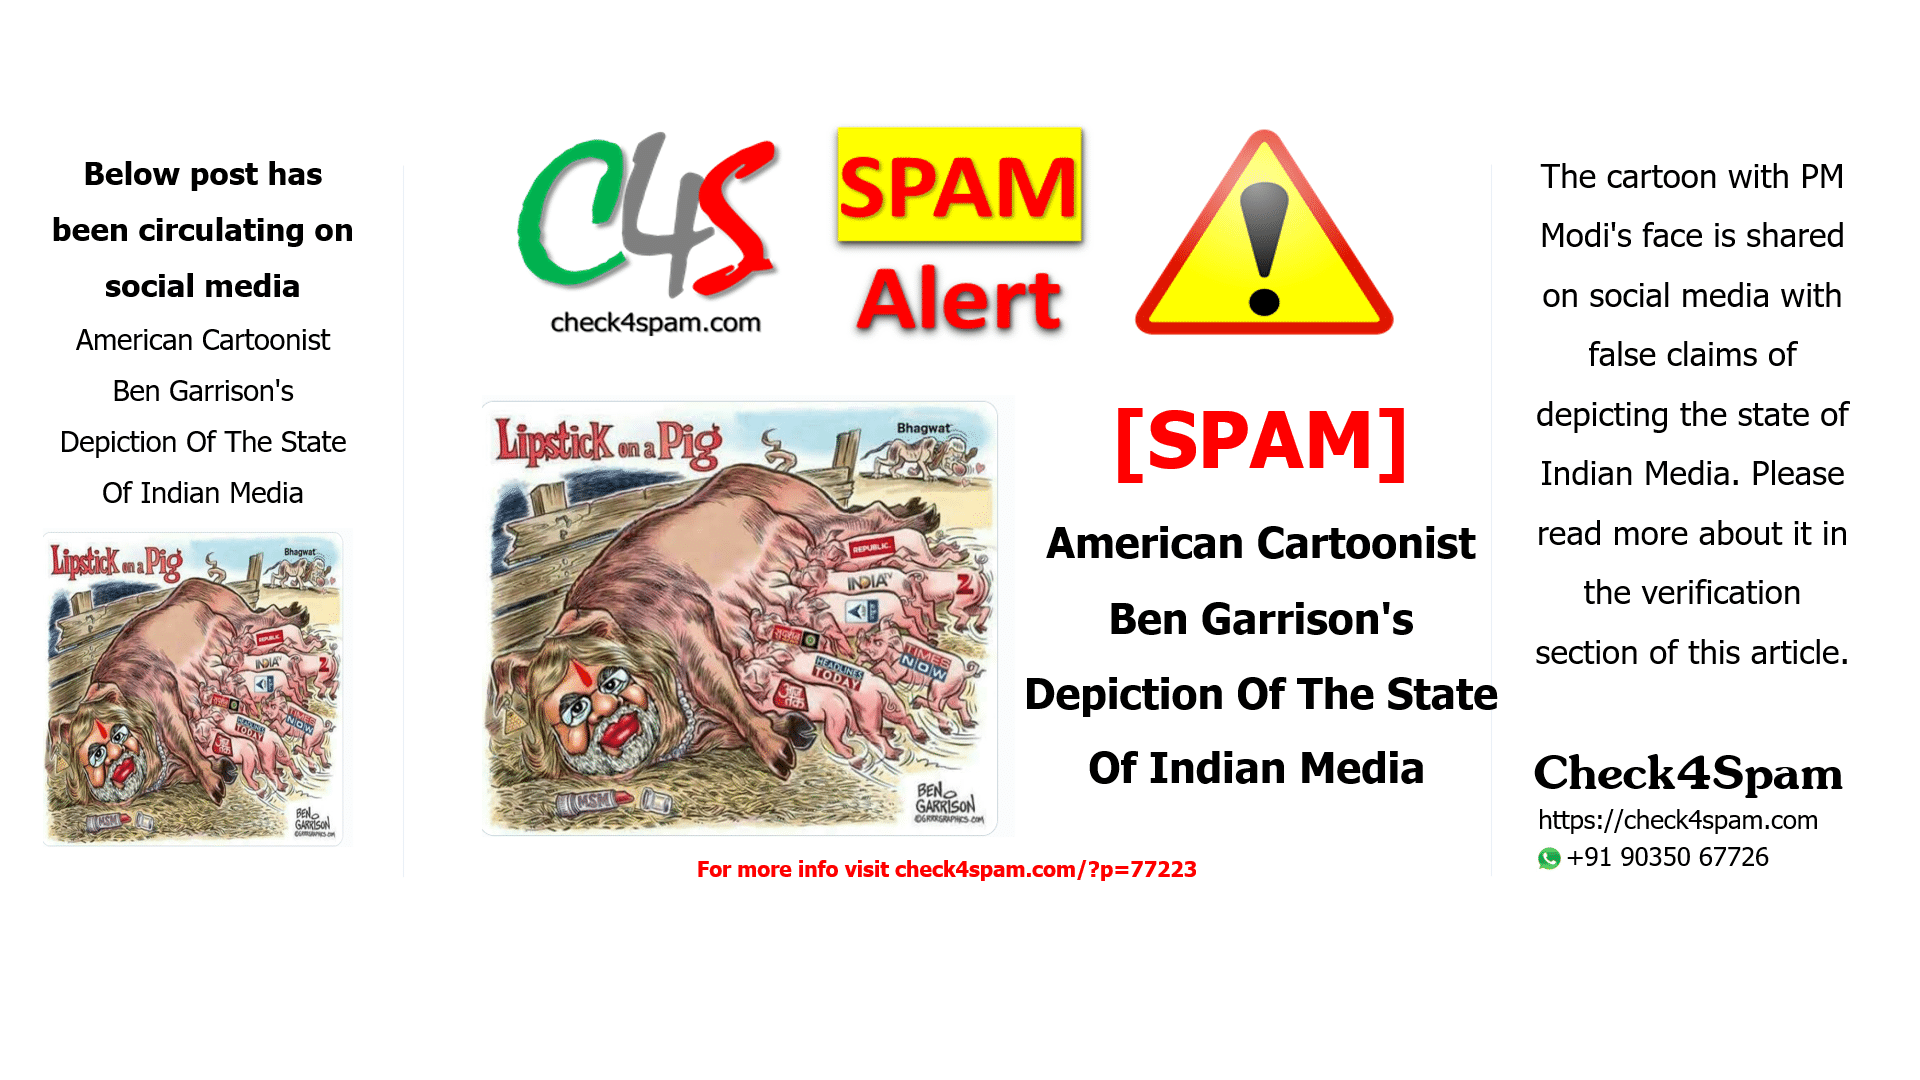 American Cartoonist Ben Garrison's Depiction Of The State Of Indian Media